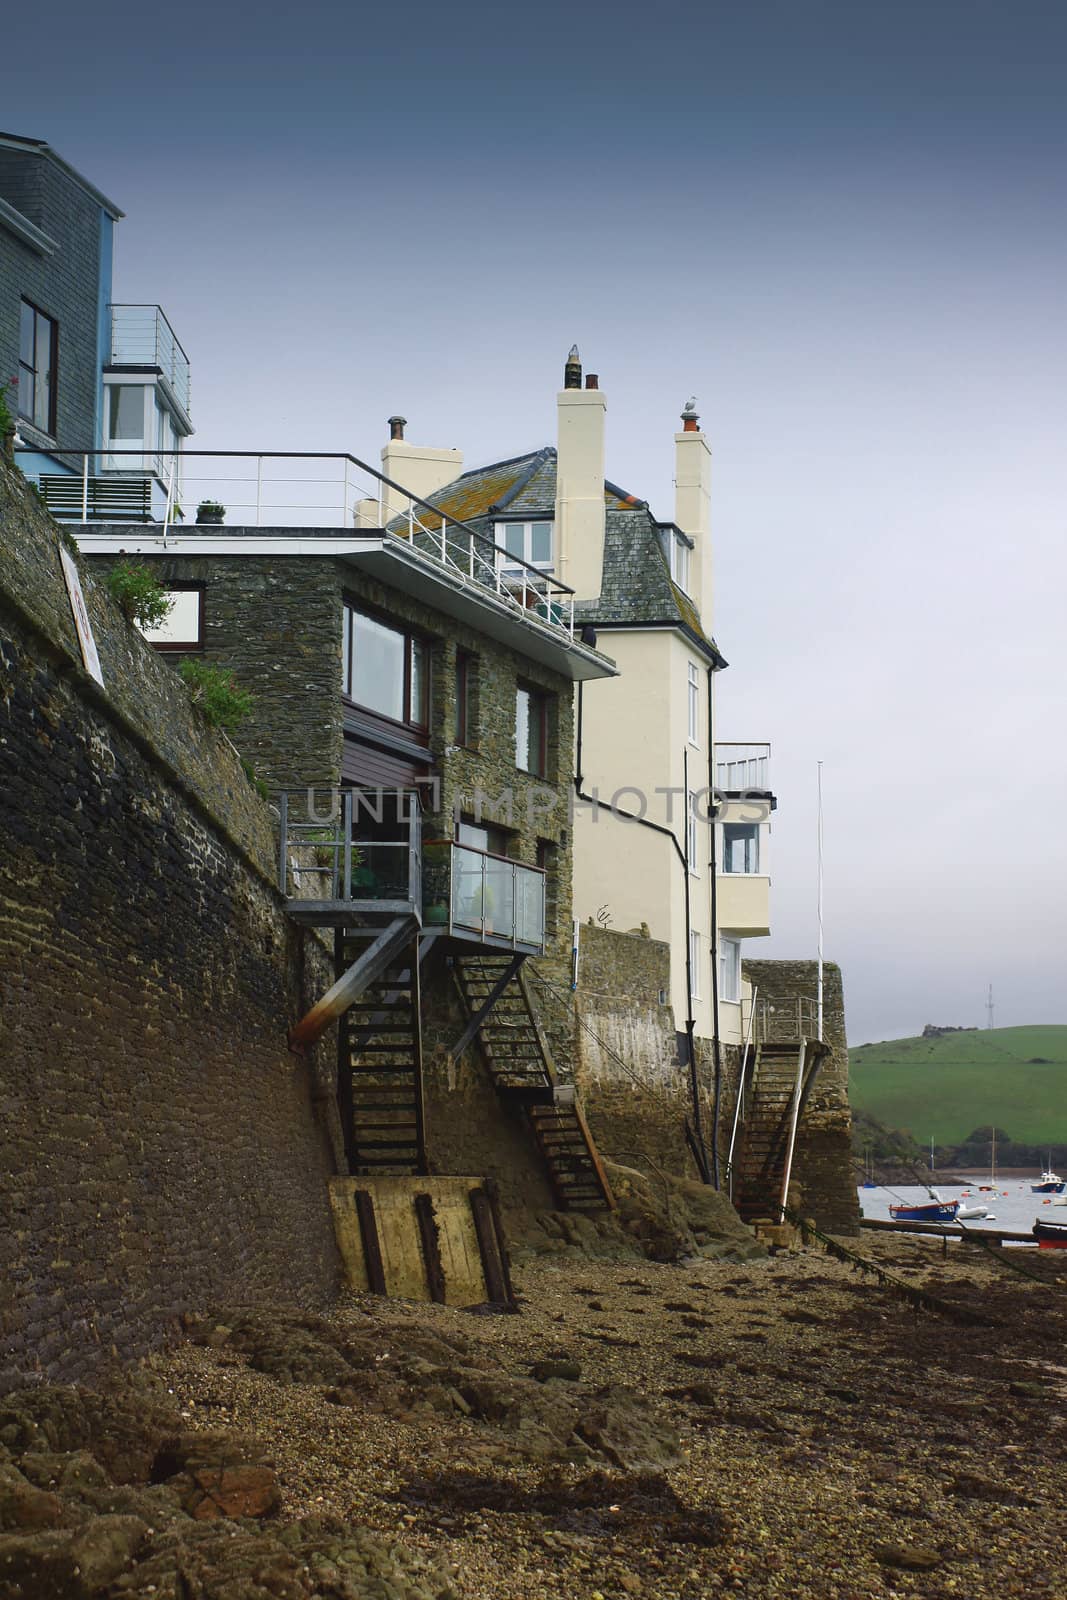 Low tide at Salcombe in devon. A portrait format image showing sea shore buildings with access to the shore via stairways.